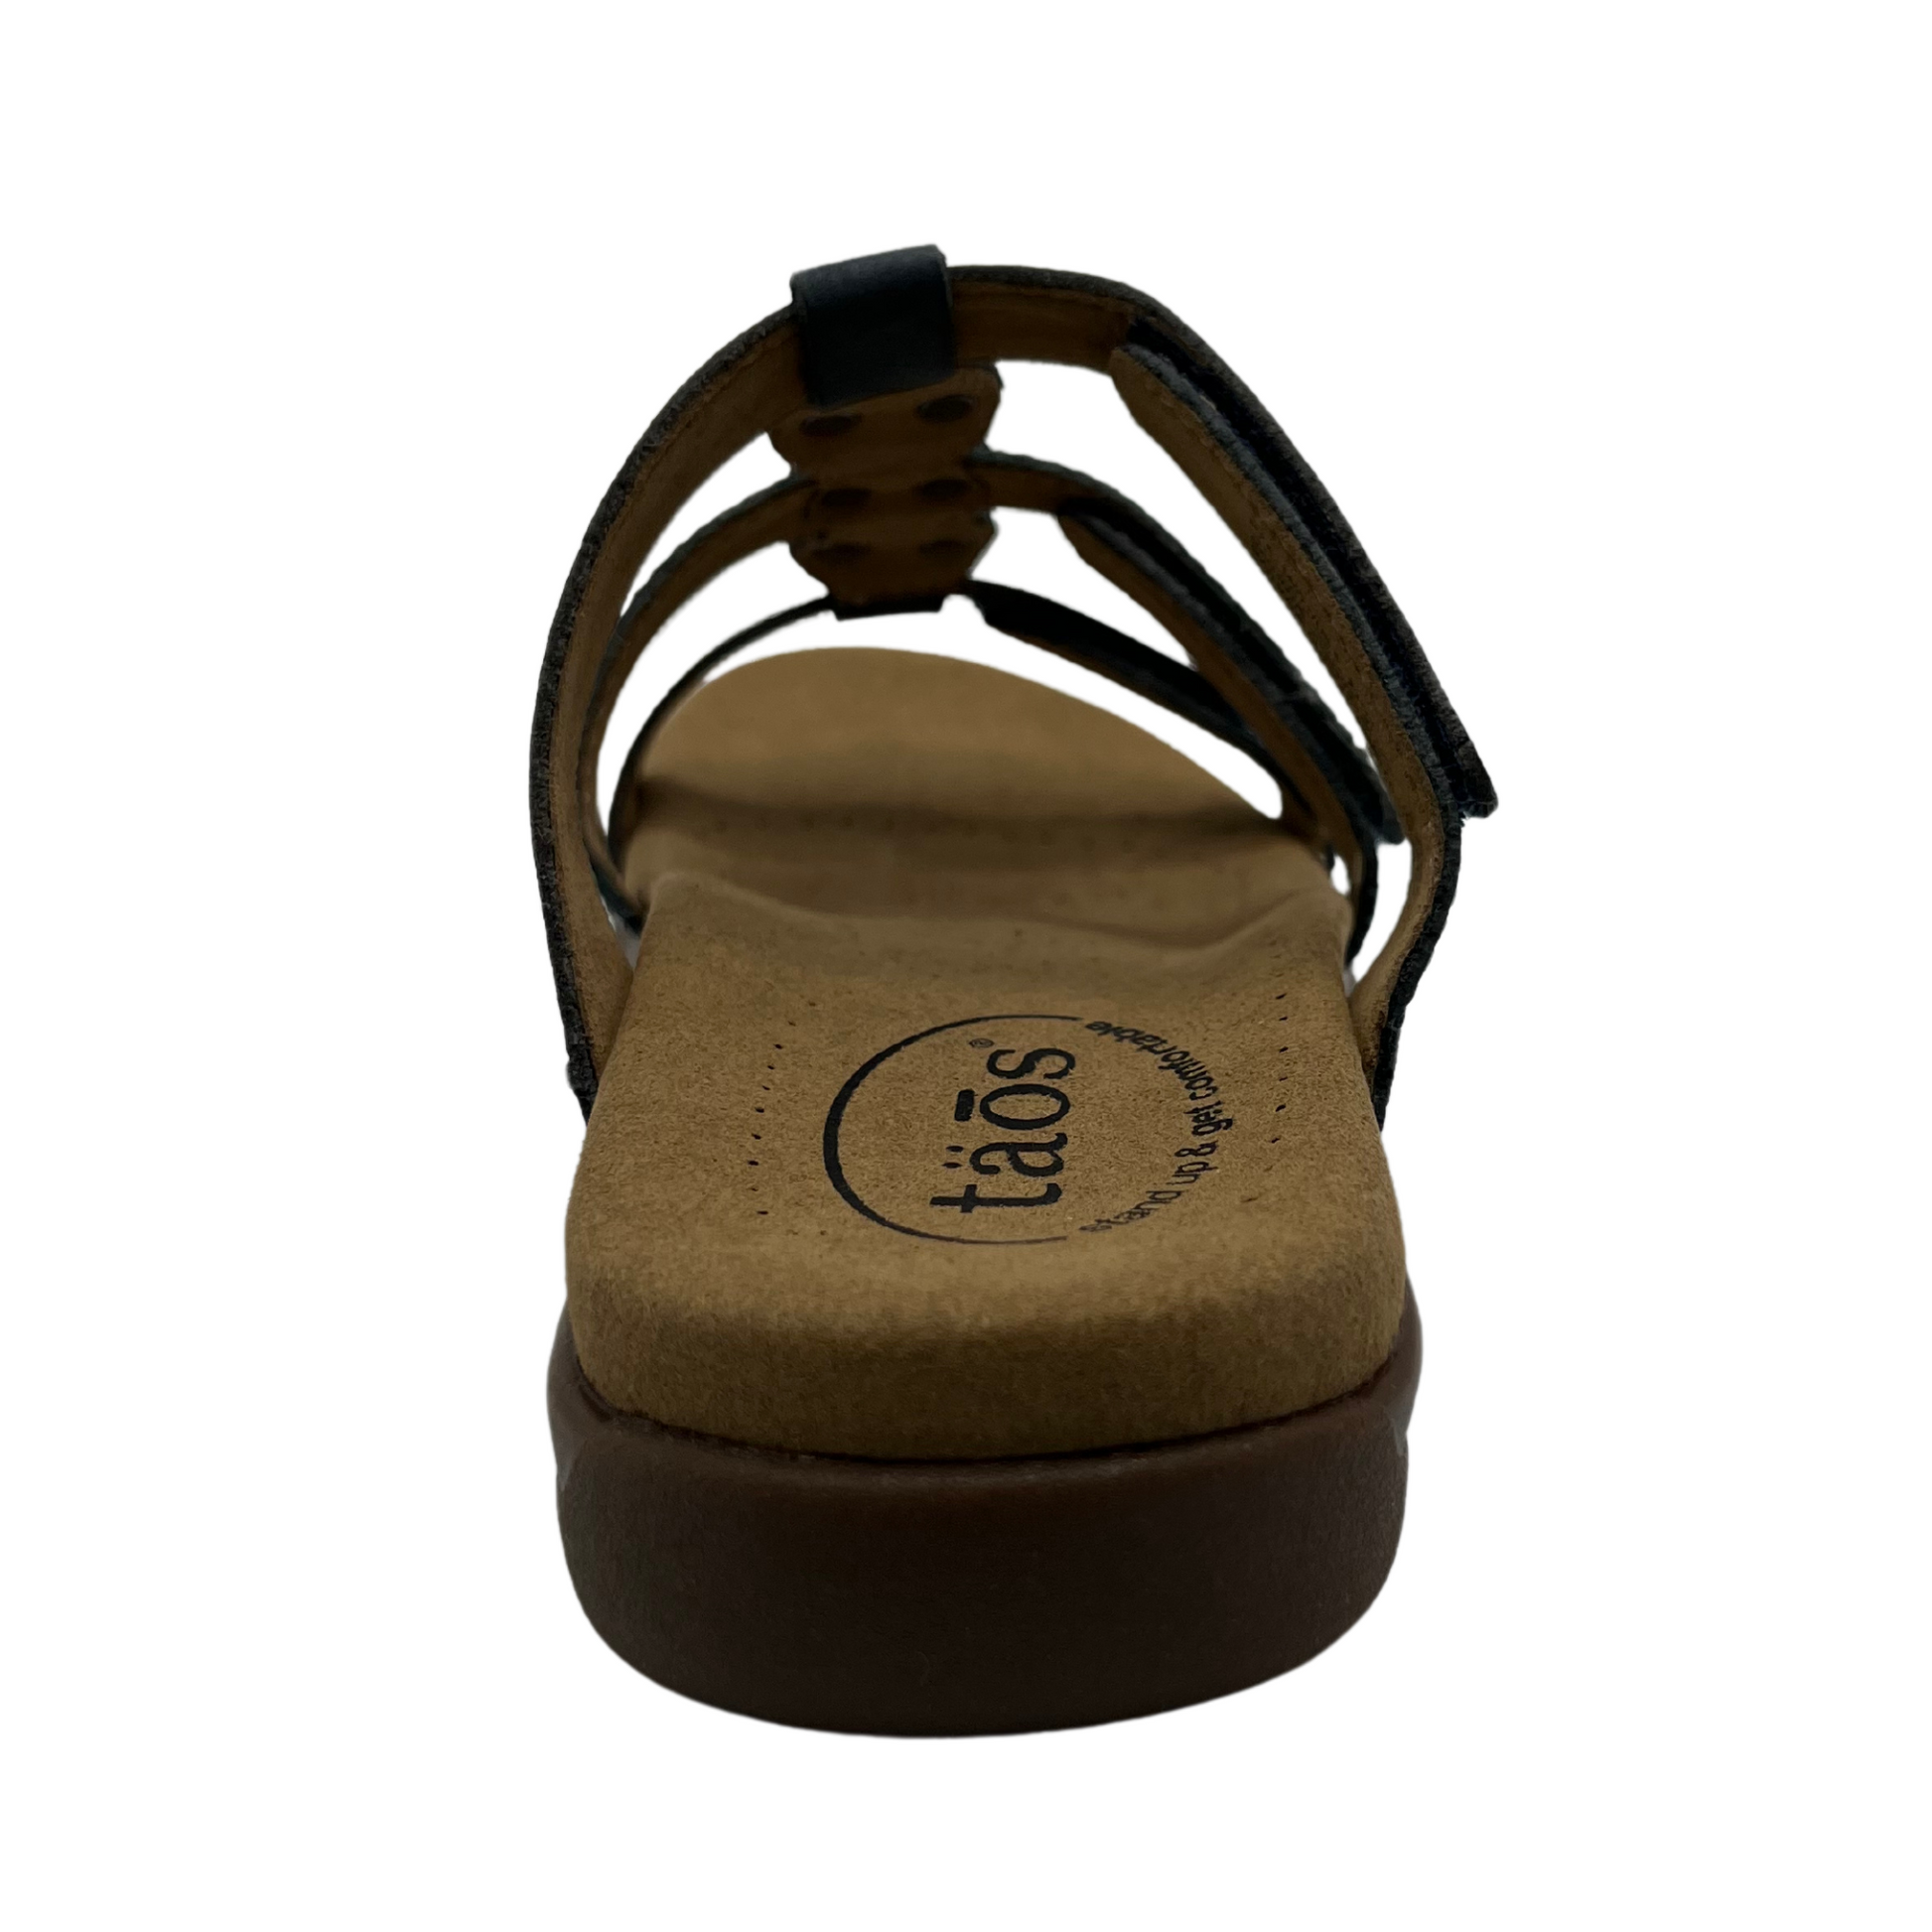 Back view of leather sandal with 3 straps and slip on style. Hook and loop closures on straps and lined anatomical footbed